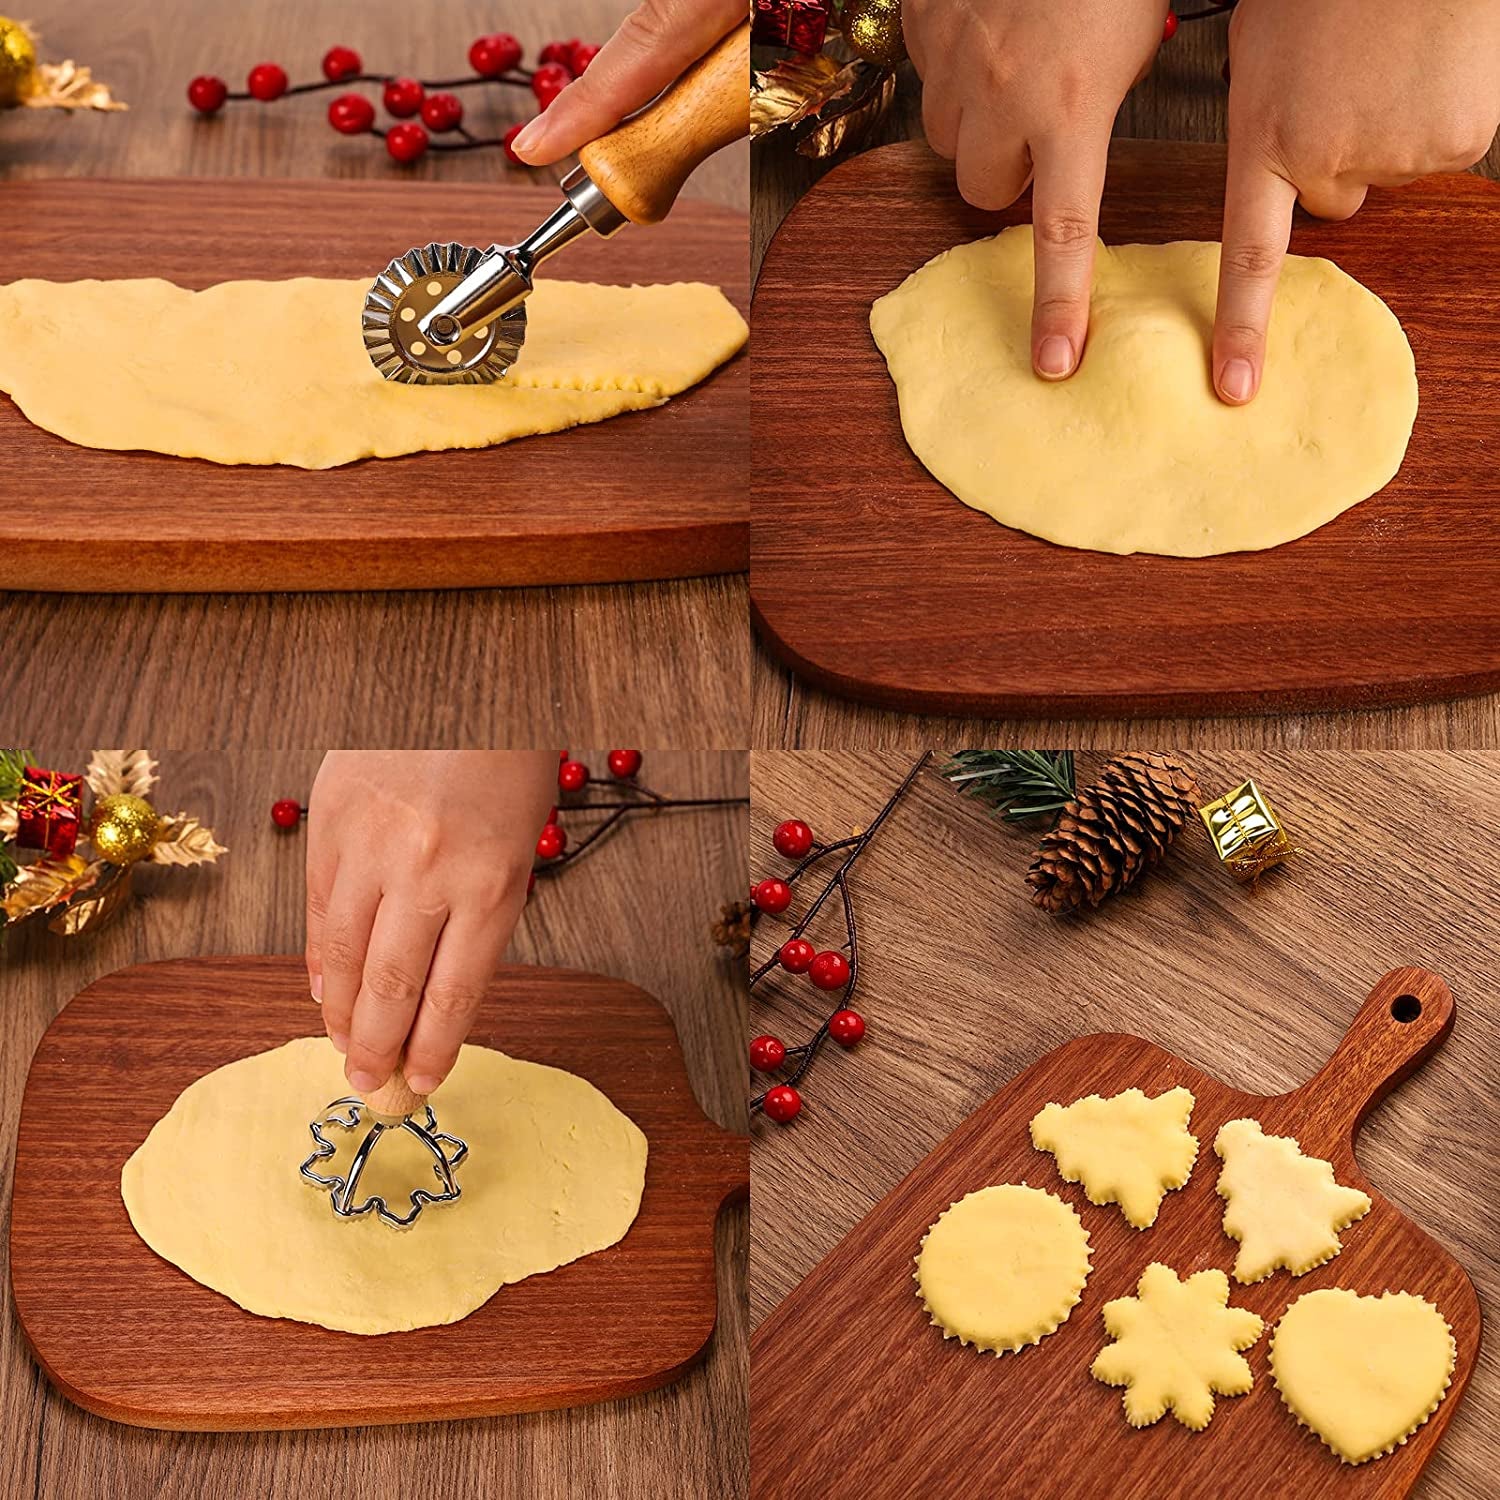 Ravioli Stamp Set - 5 Pieces, Christmas-Style Molds, Wooden Handle